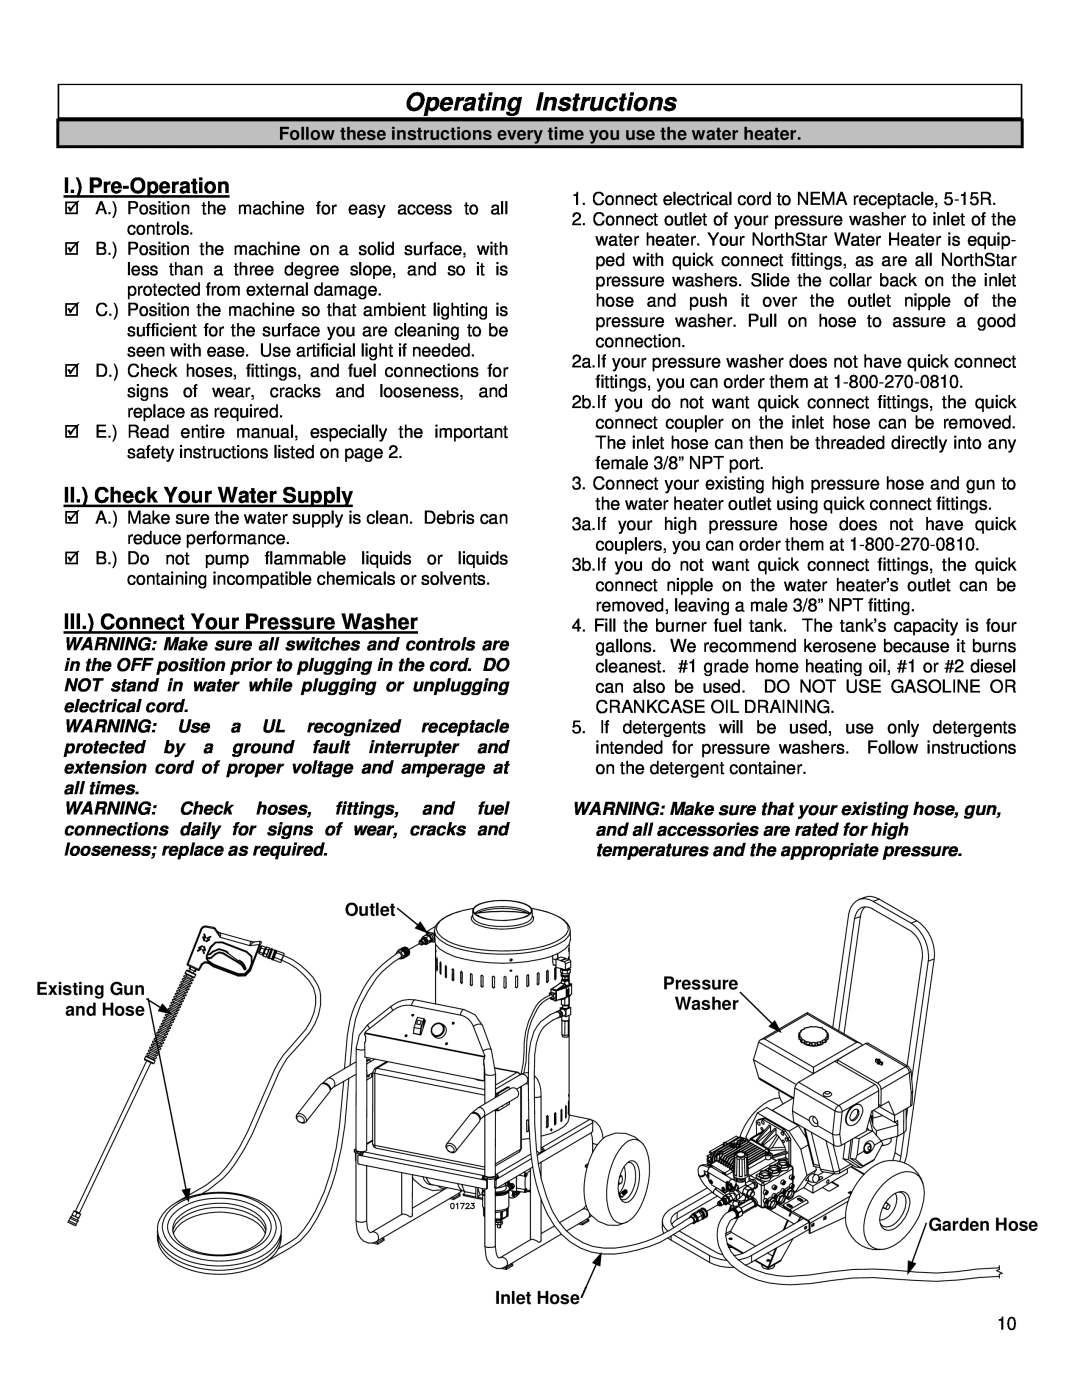 Northern Industrial Tools 157494 Operating Instructions, I. Pre-Operation, II. Check Your Water Supply, Outlet, Pressure 